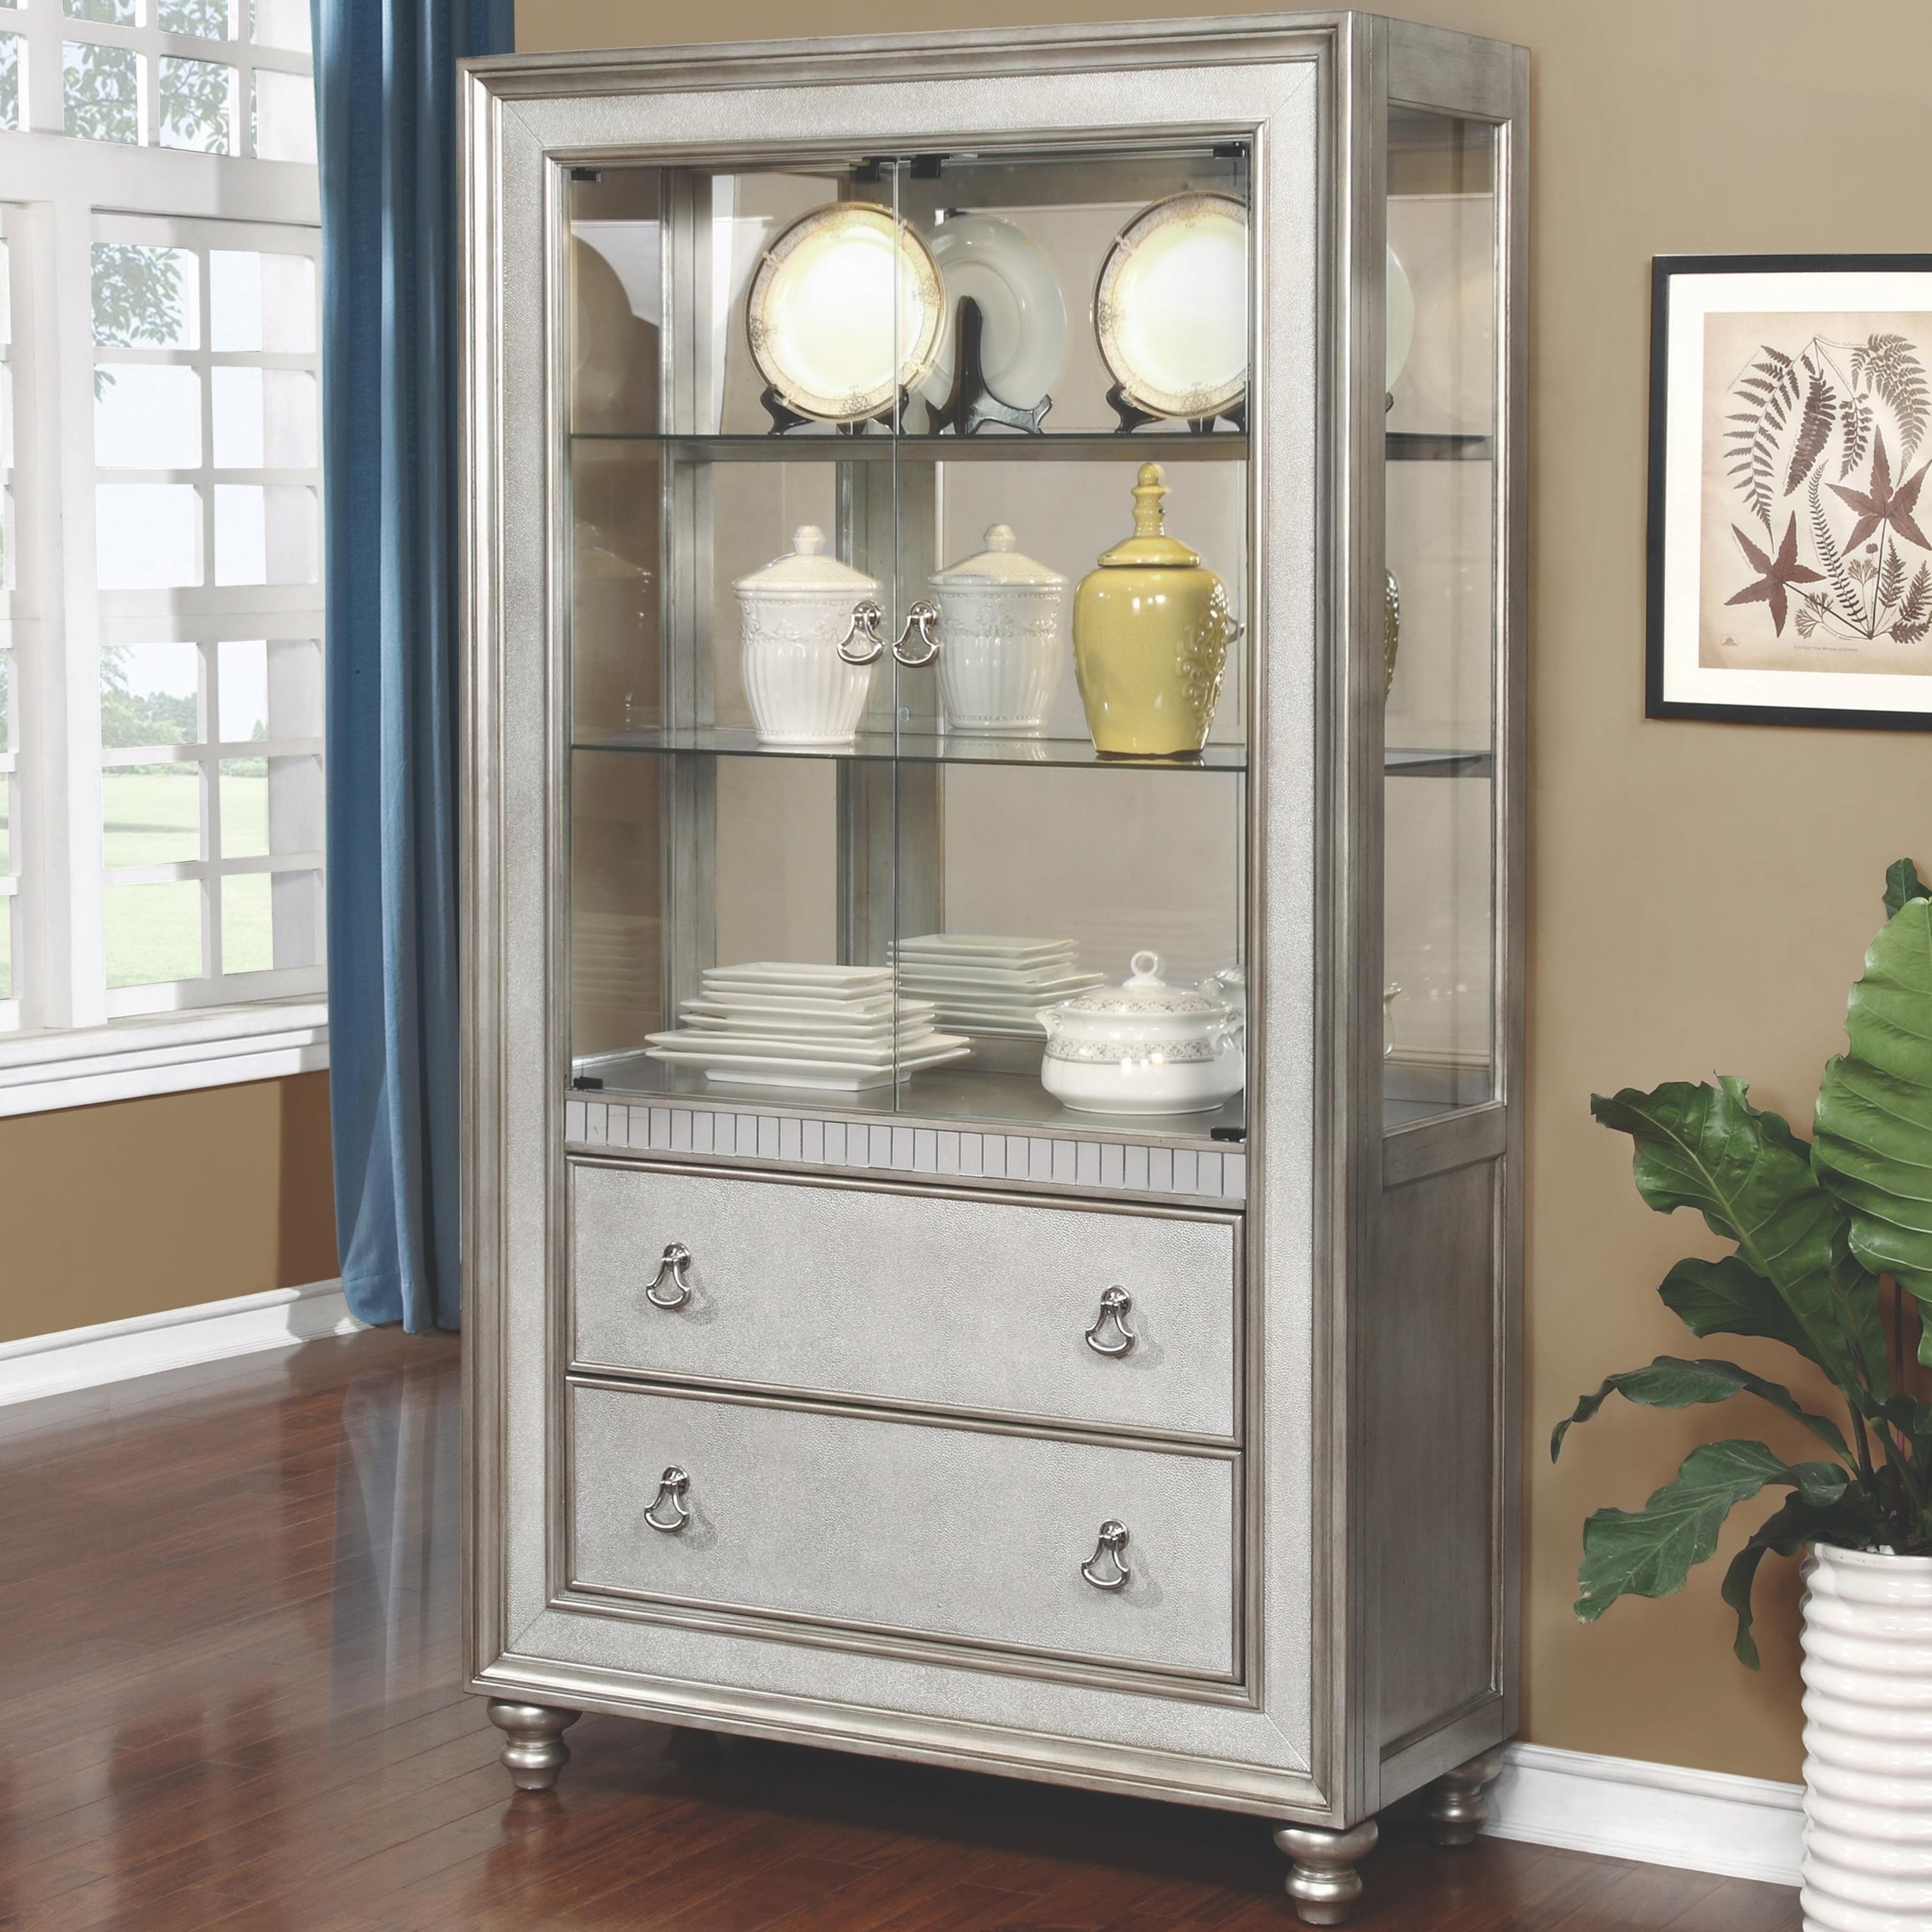 Bling game curio cabinet with 3 shelves and 2 drawers